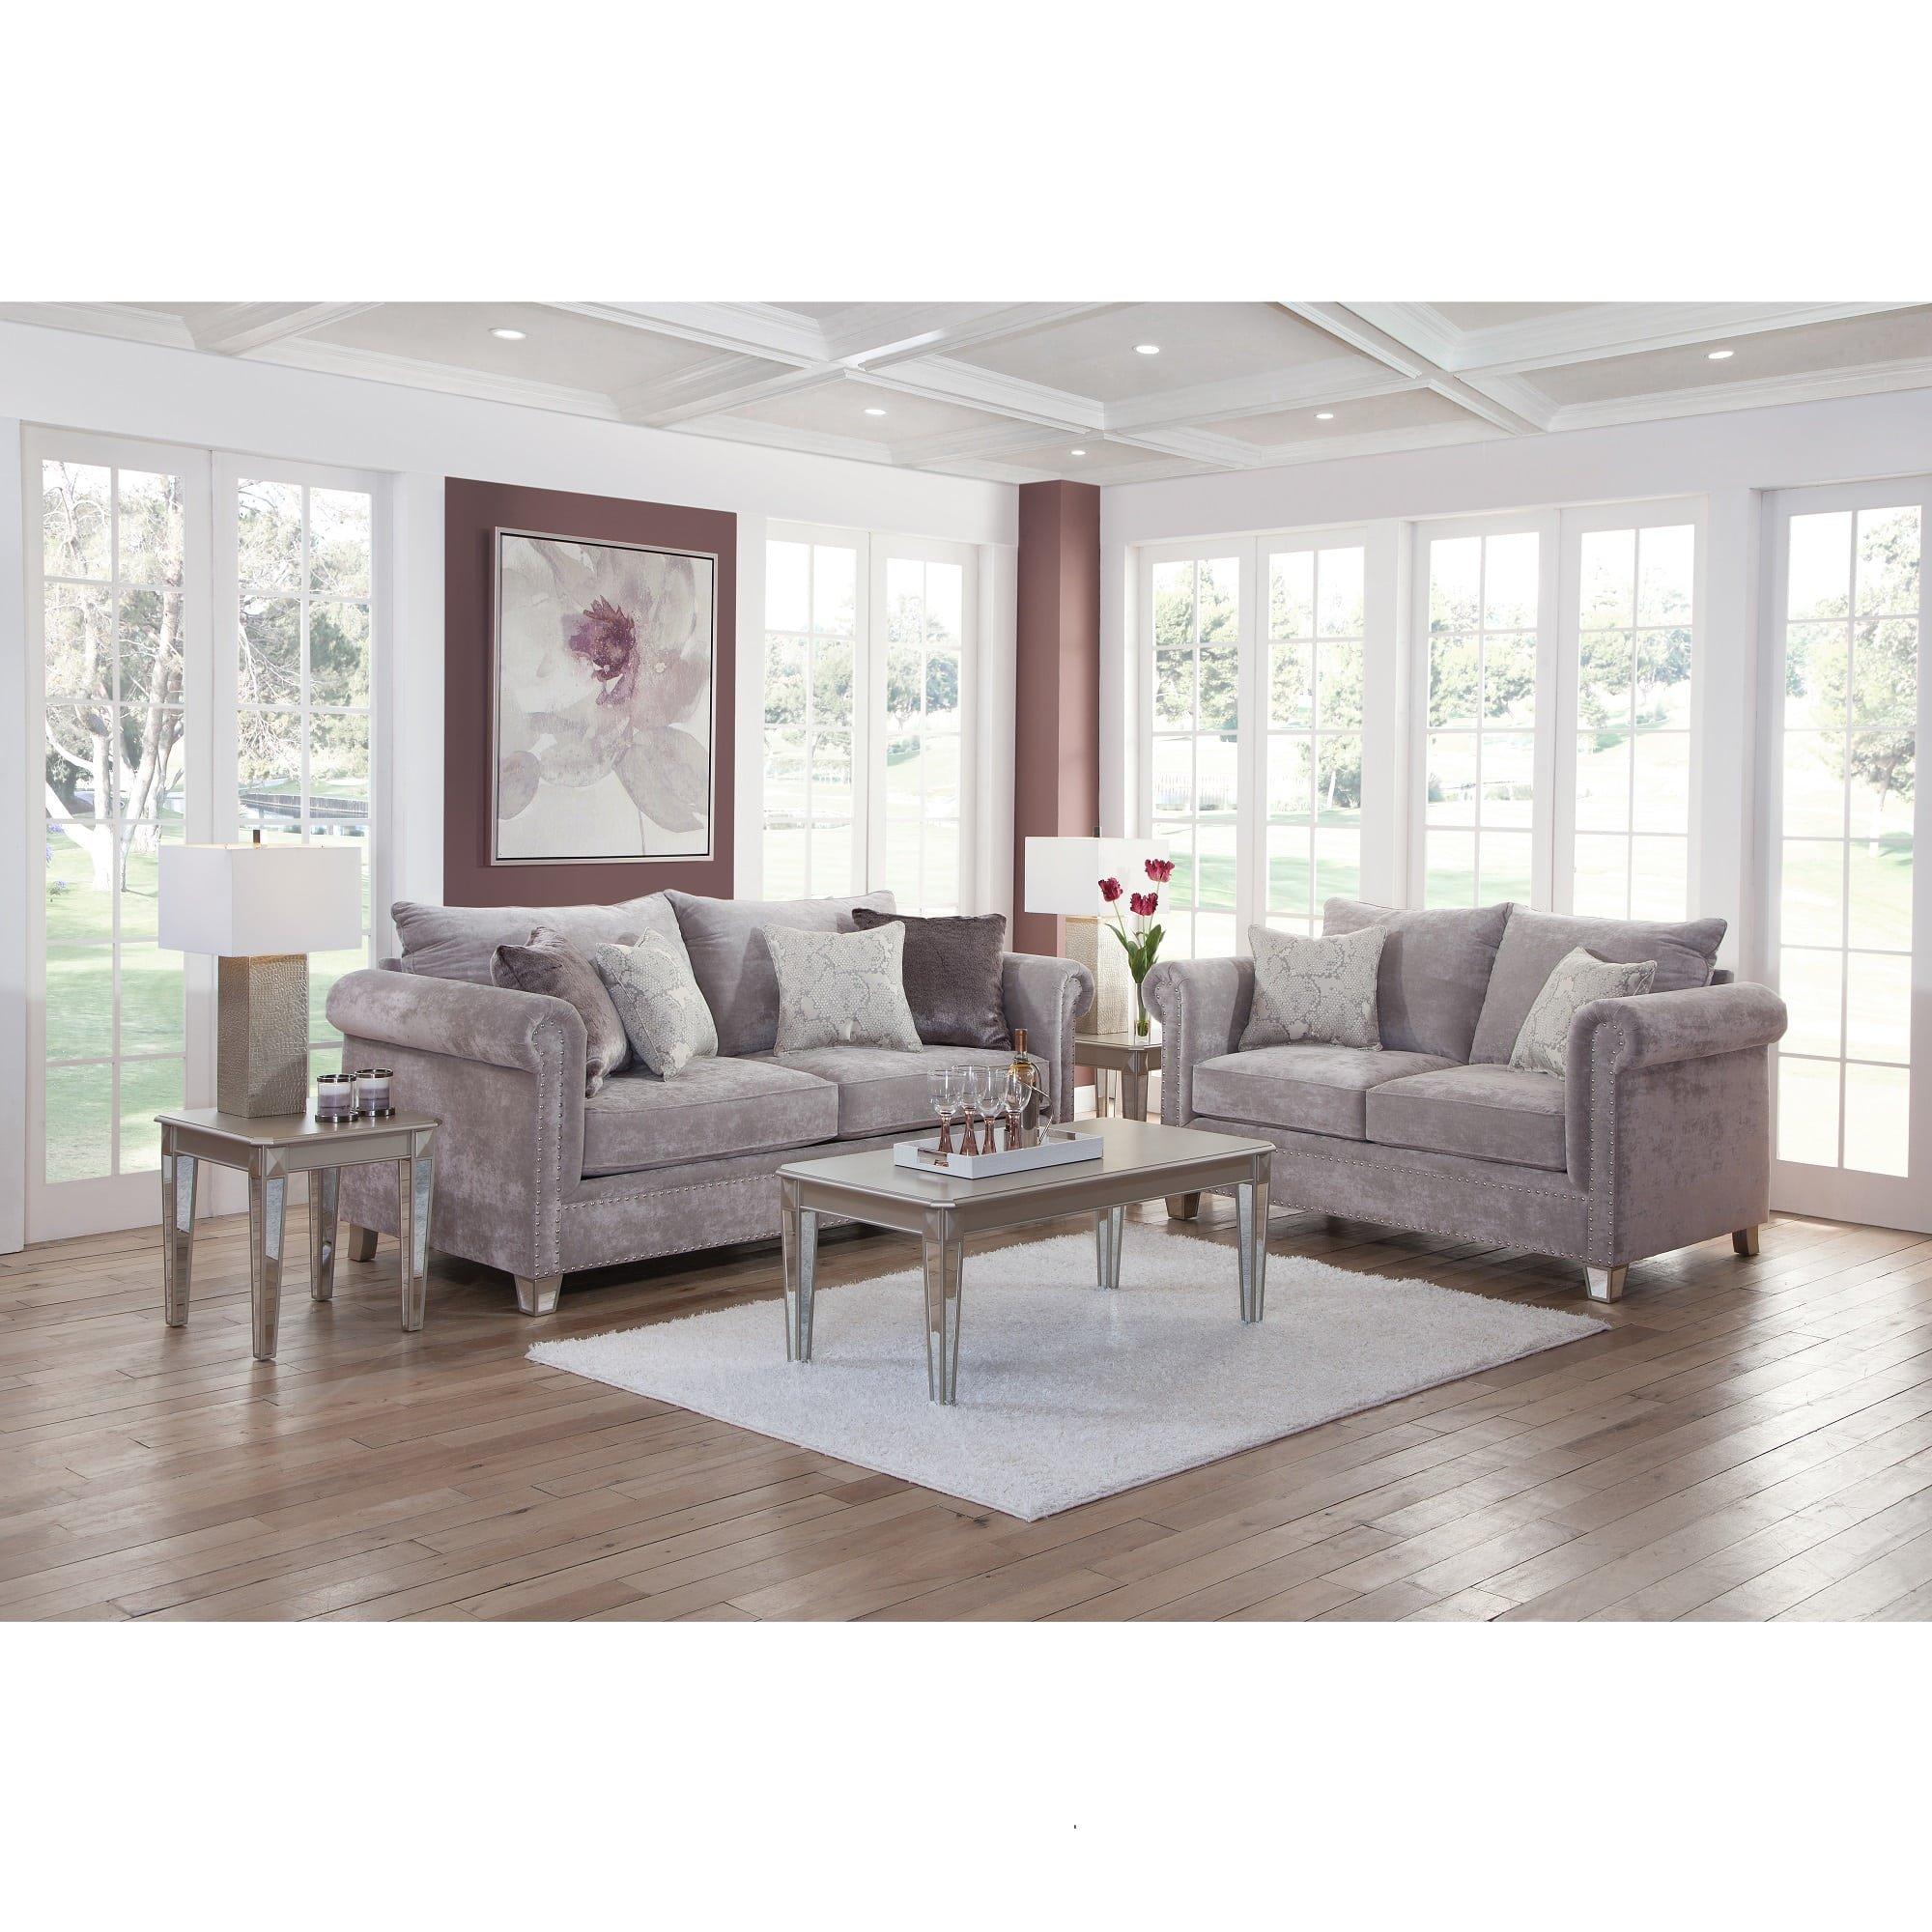 Rent To Own Woodhaven 7 Piece Hollywood Living Room Collection At Aarons Today